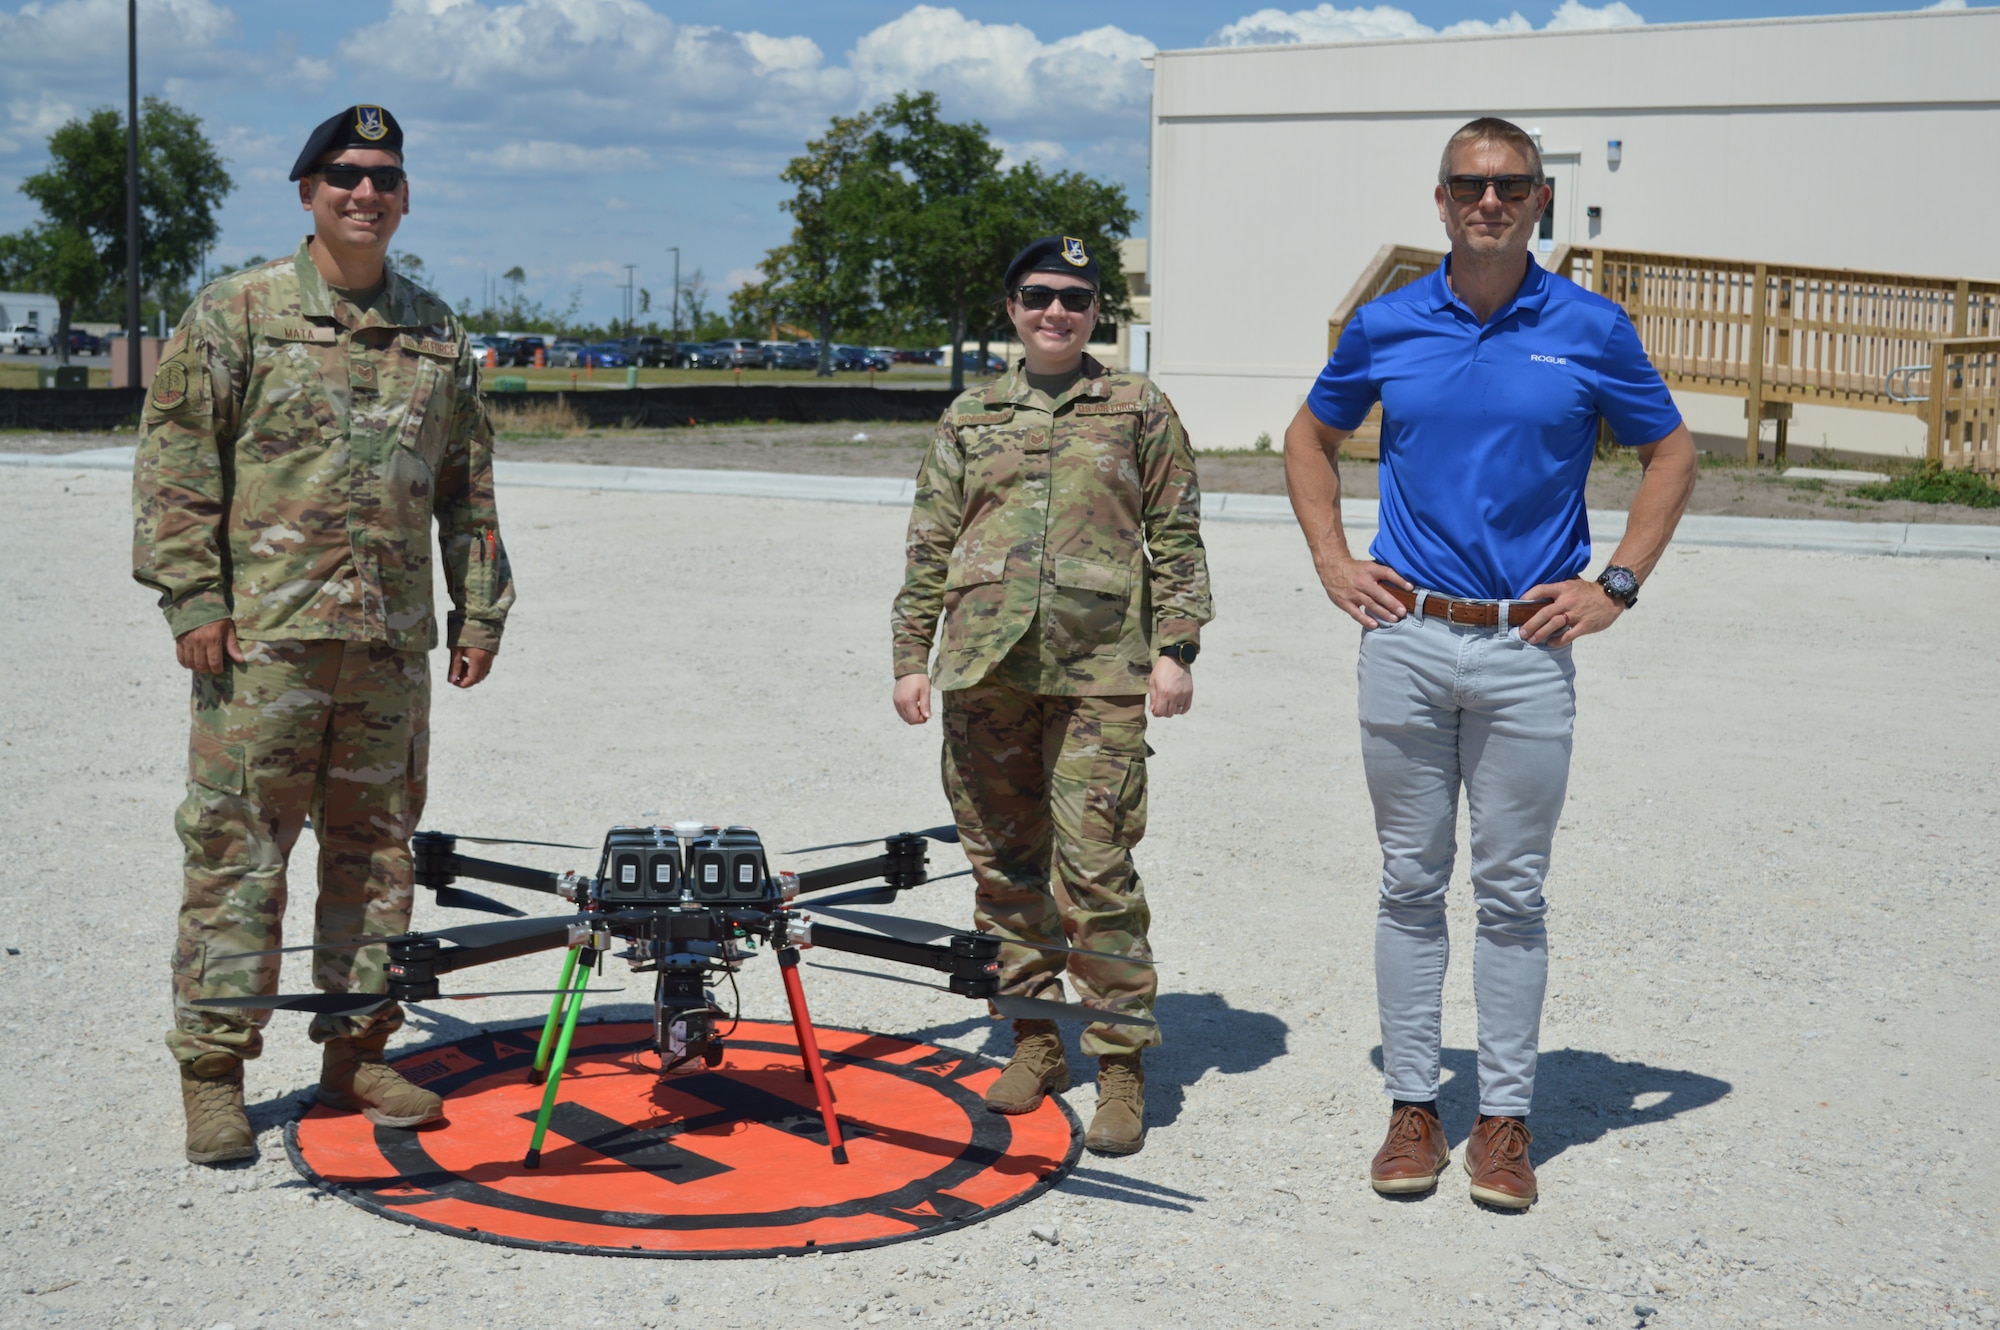 Members of the 325th Security Forces Squadron and Tyndall Program Management Office integration chief, Lowell Usrey, pose by a drone at Tyndall Air Force Base, Florida, June 4, 2021. The drone captured data for a Digital Twin replica of the installation. (U.S. Air Force photo by Sarah McNair)